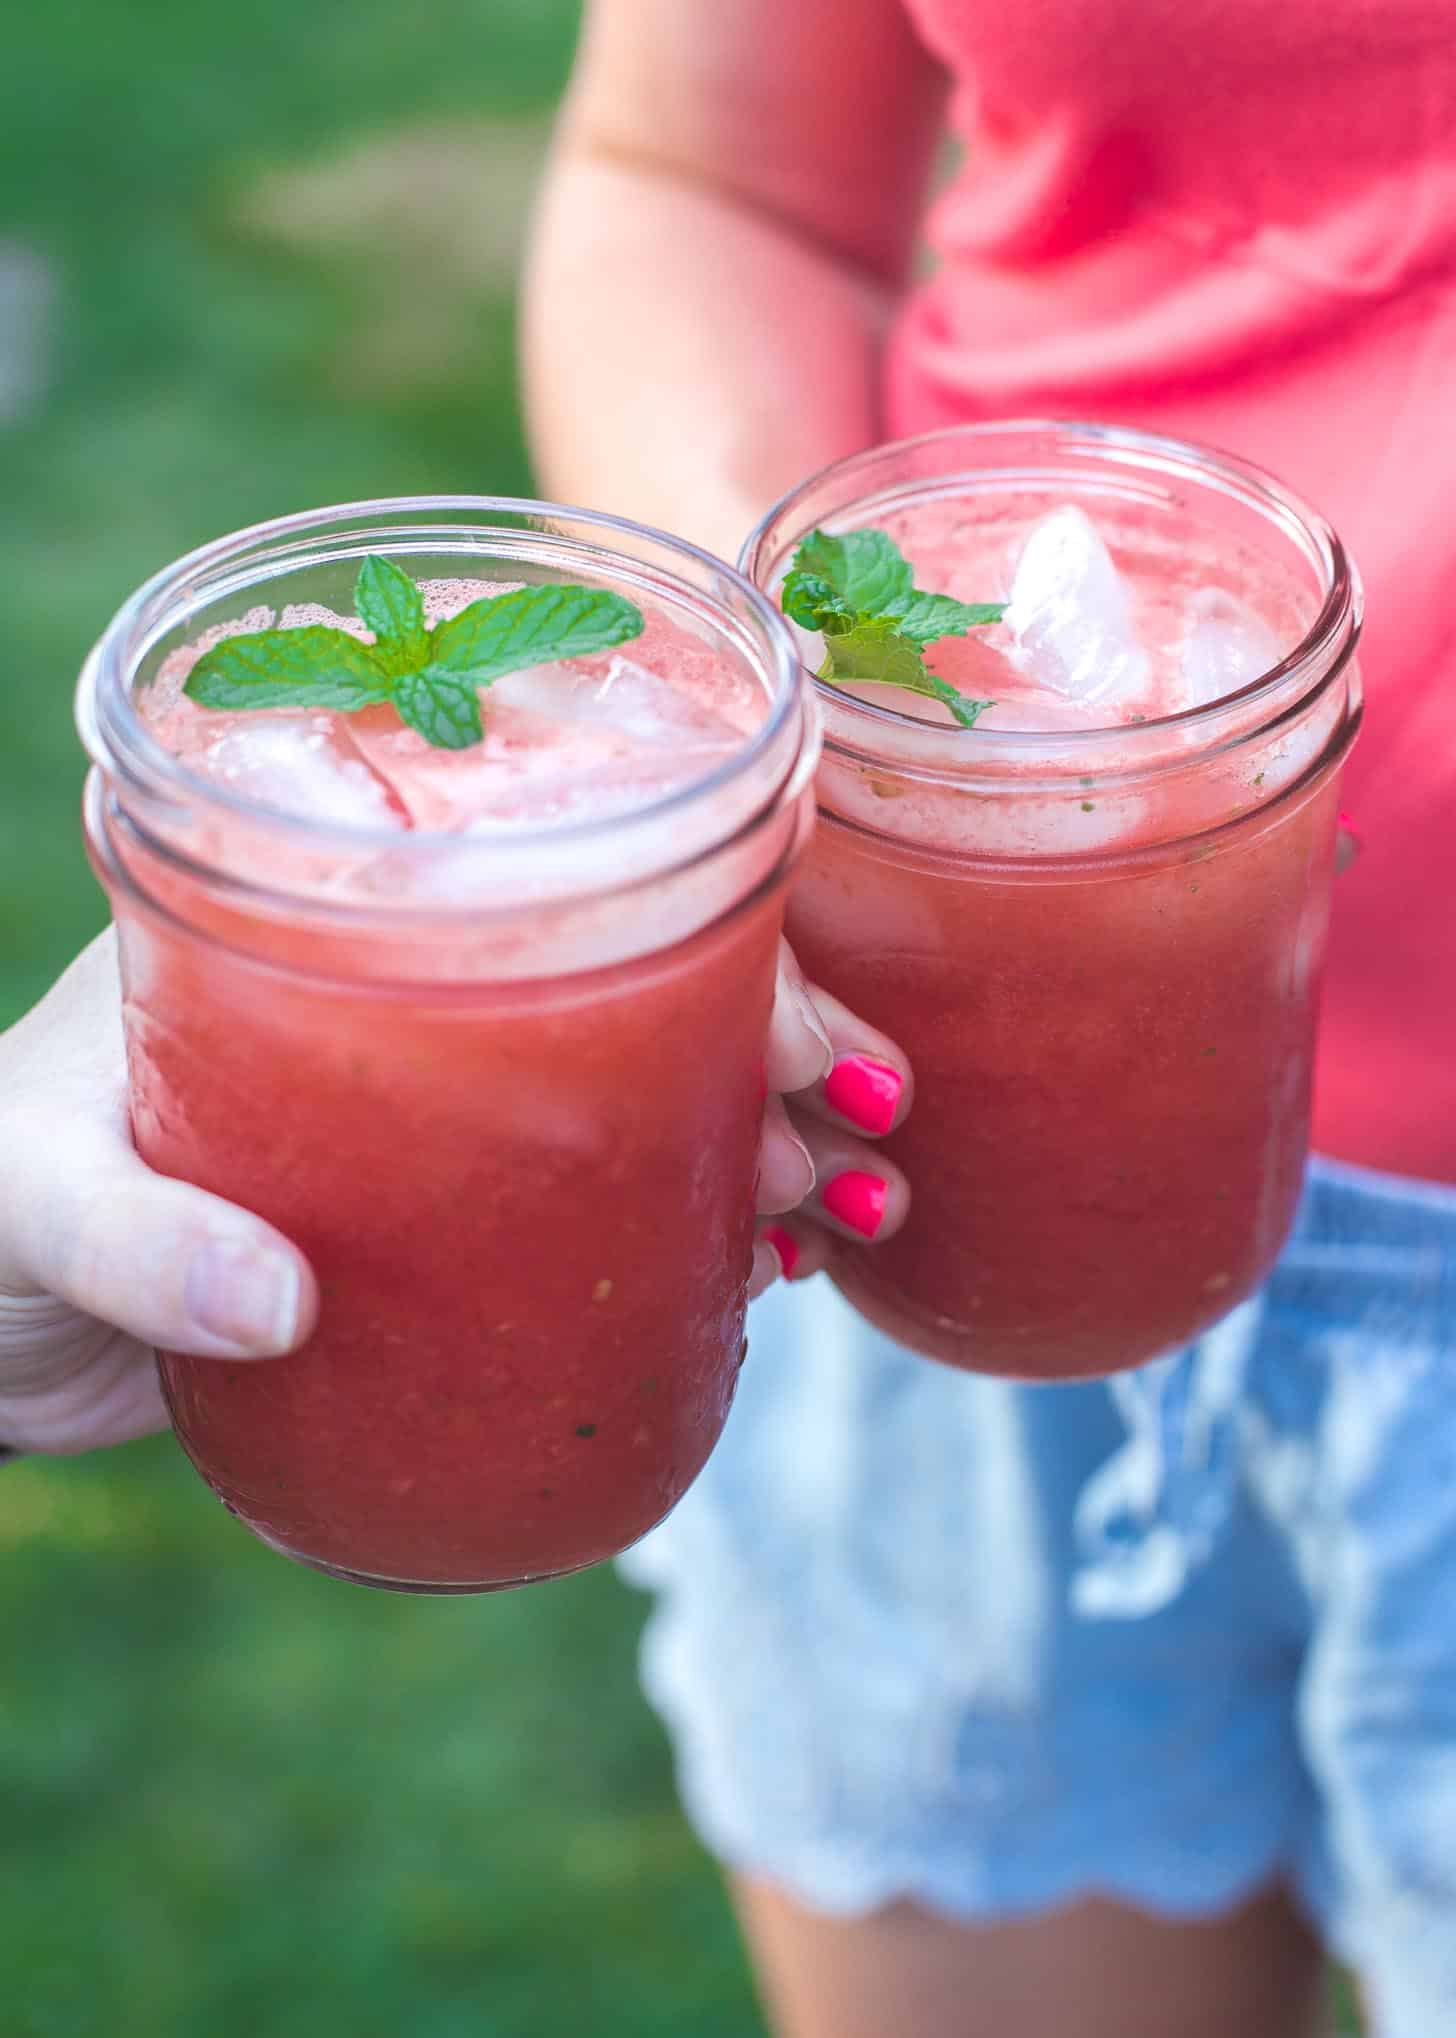 2 women's hands holding jars with watermelon lime cooler